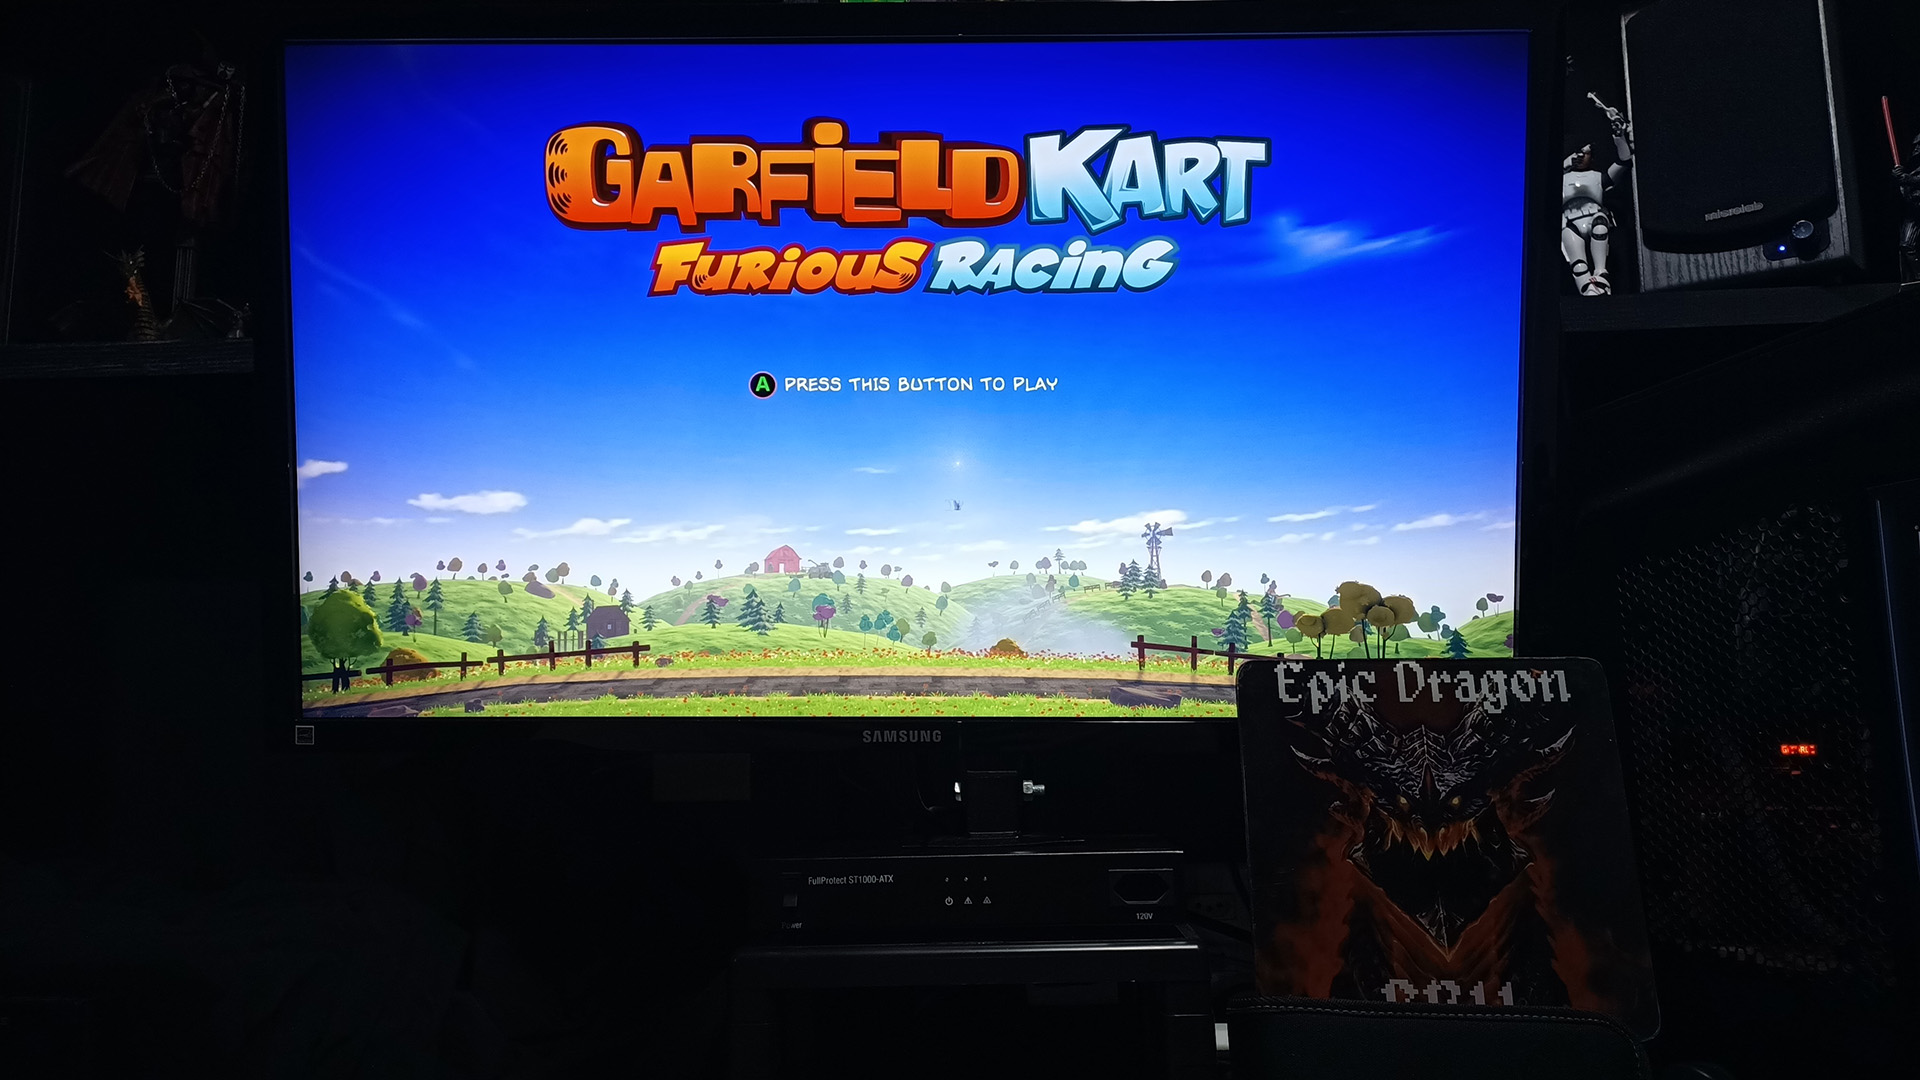 Garfield Kart Furious Racing: Blazing Oasis [Time Trial: Lap Time] time of 0:00:53.585